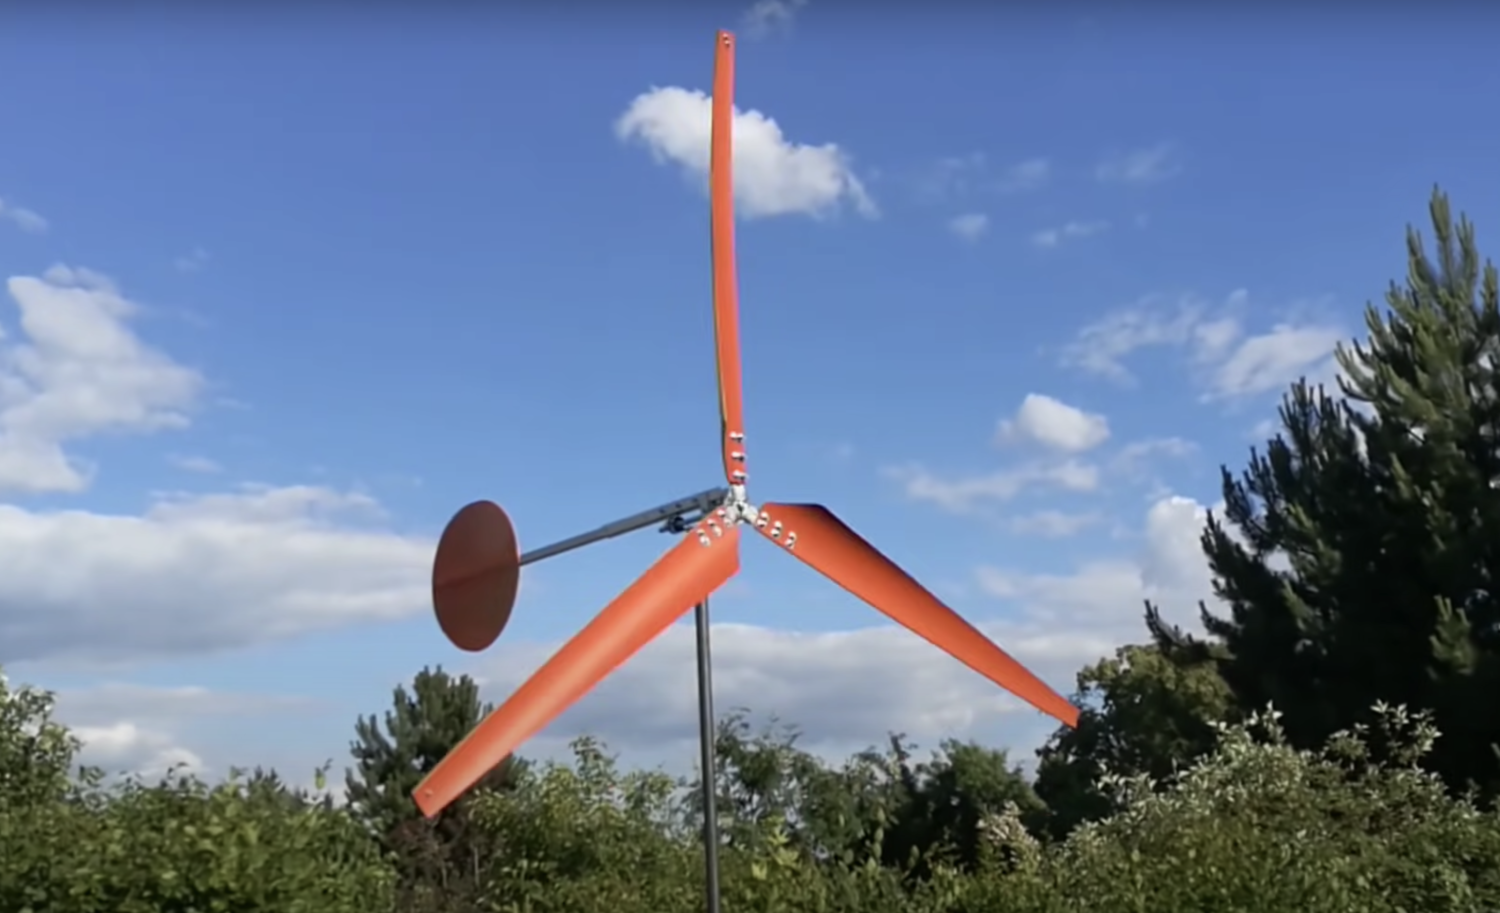 Building a DIY Wind Turbine: Important Things You Need to Know